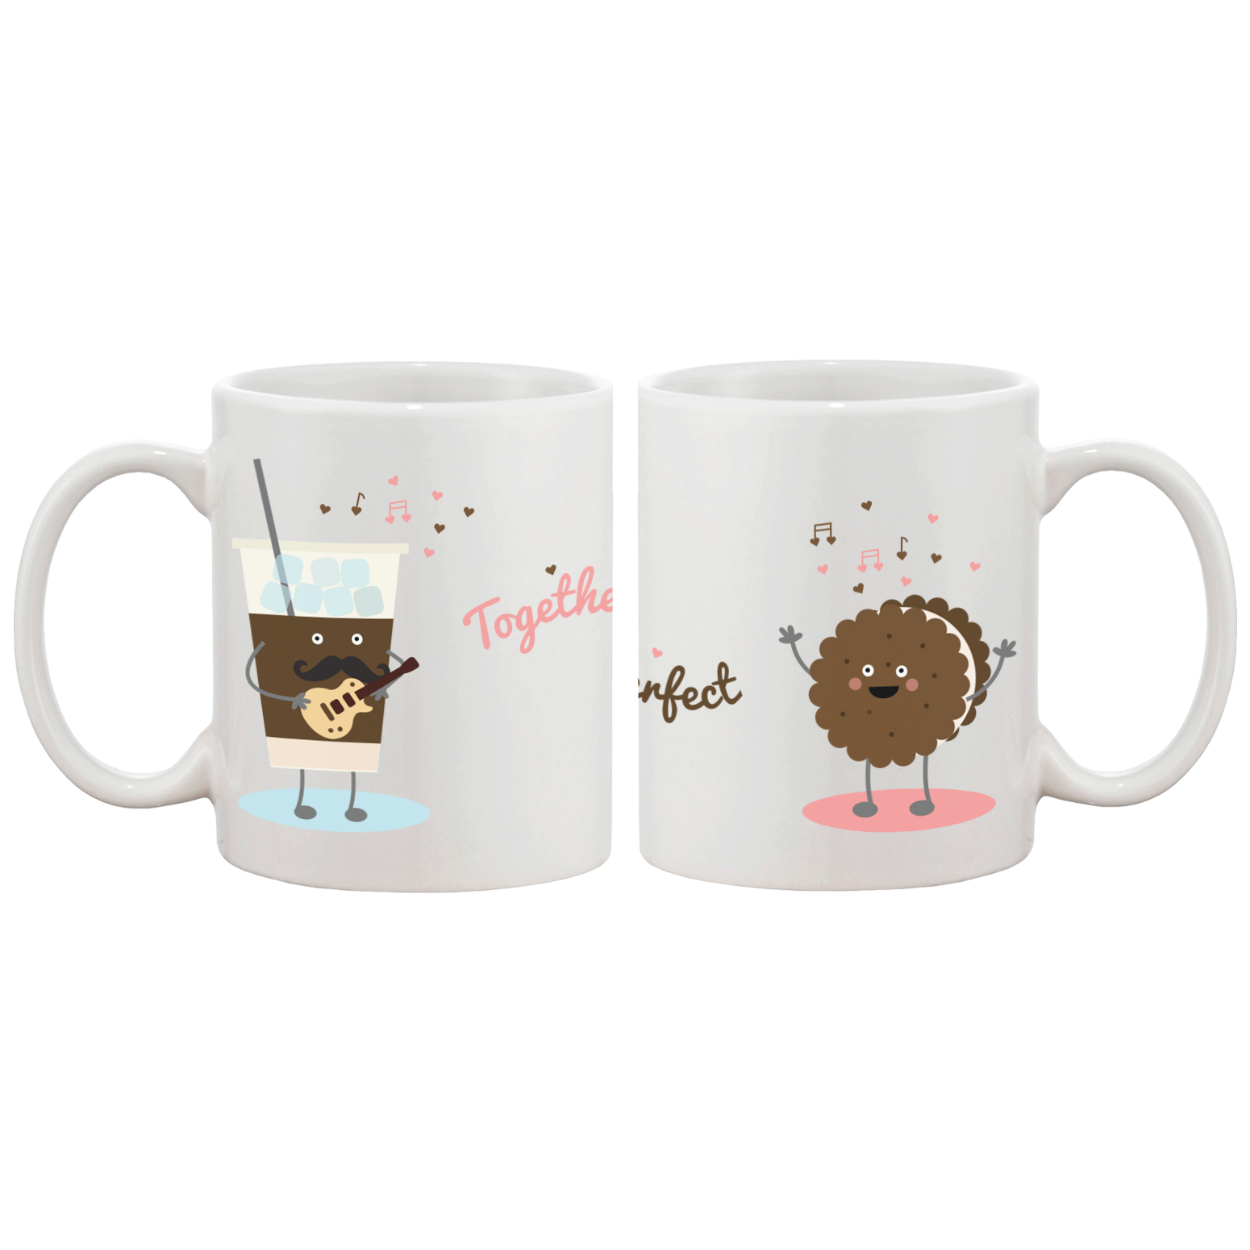 Ice Coffee Cookie Matching Couple Mugs- His and Hers Matching Coffee Cup White